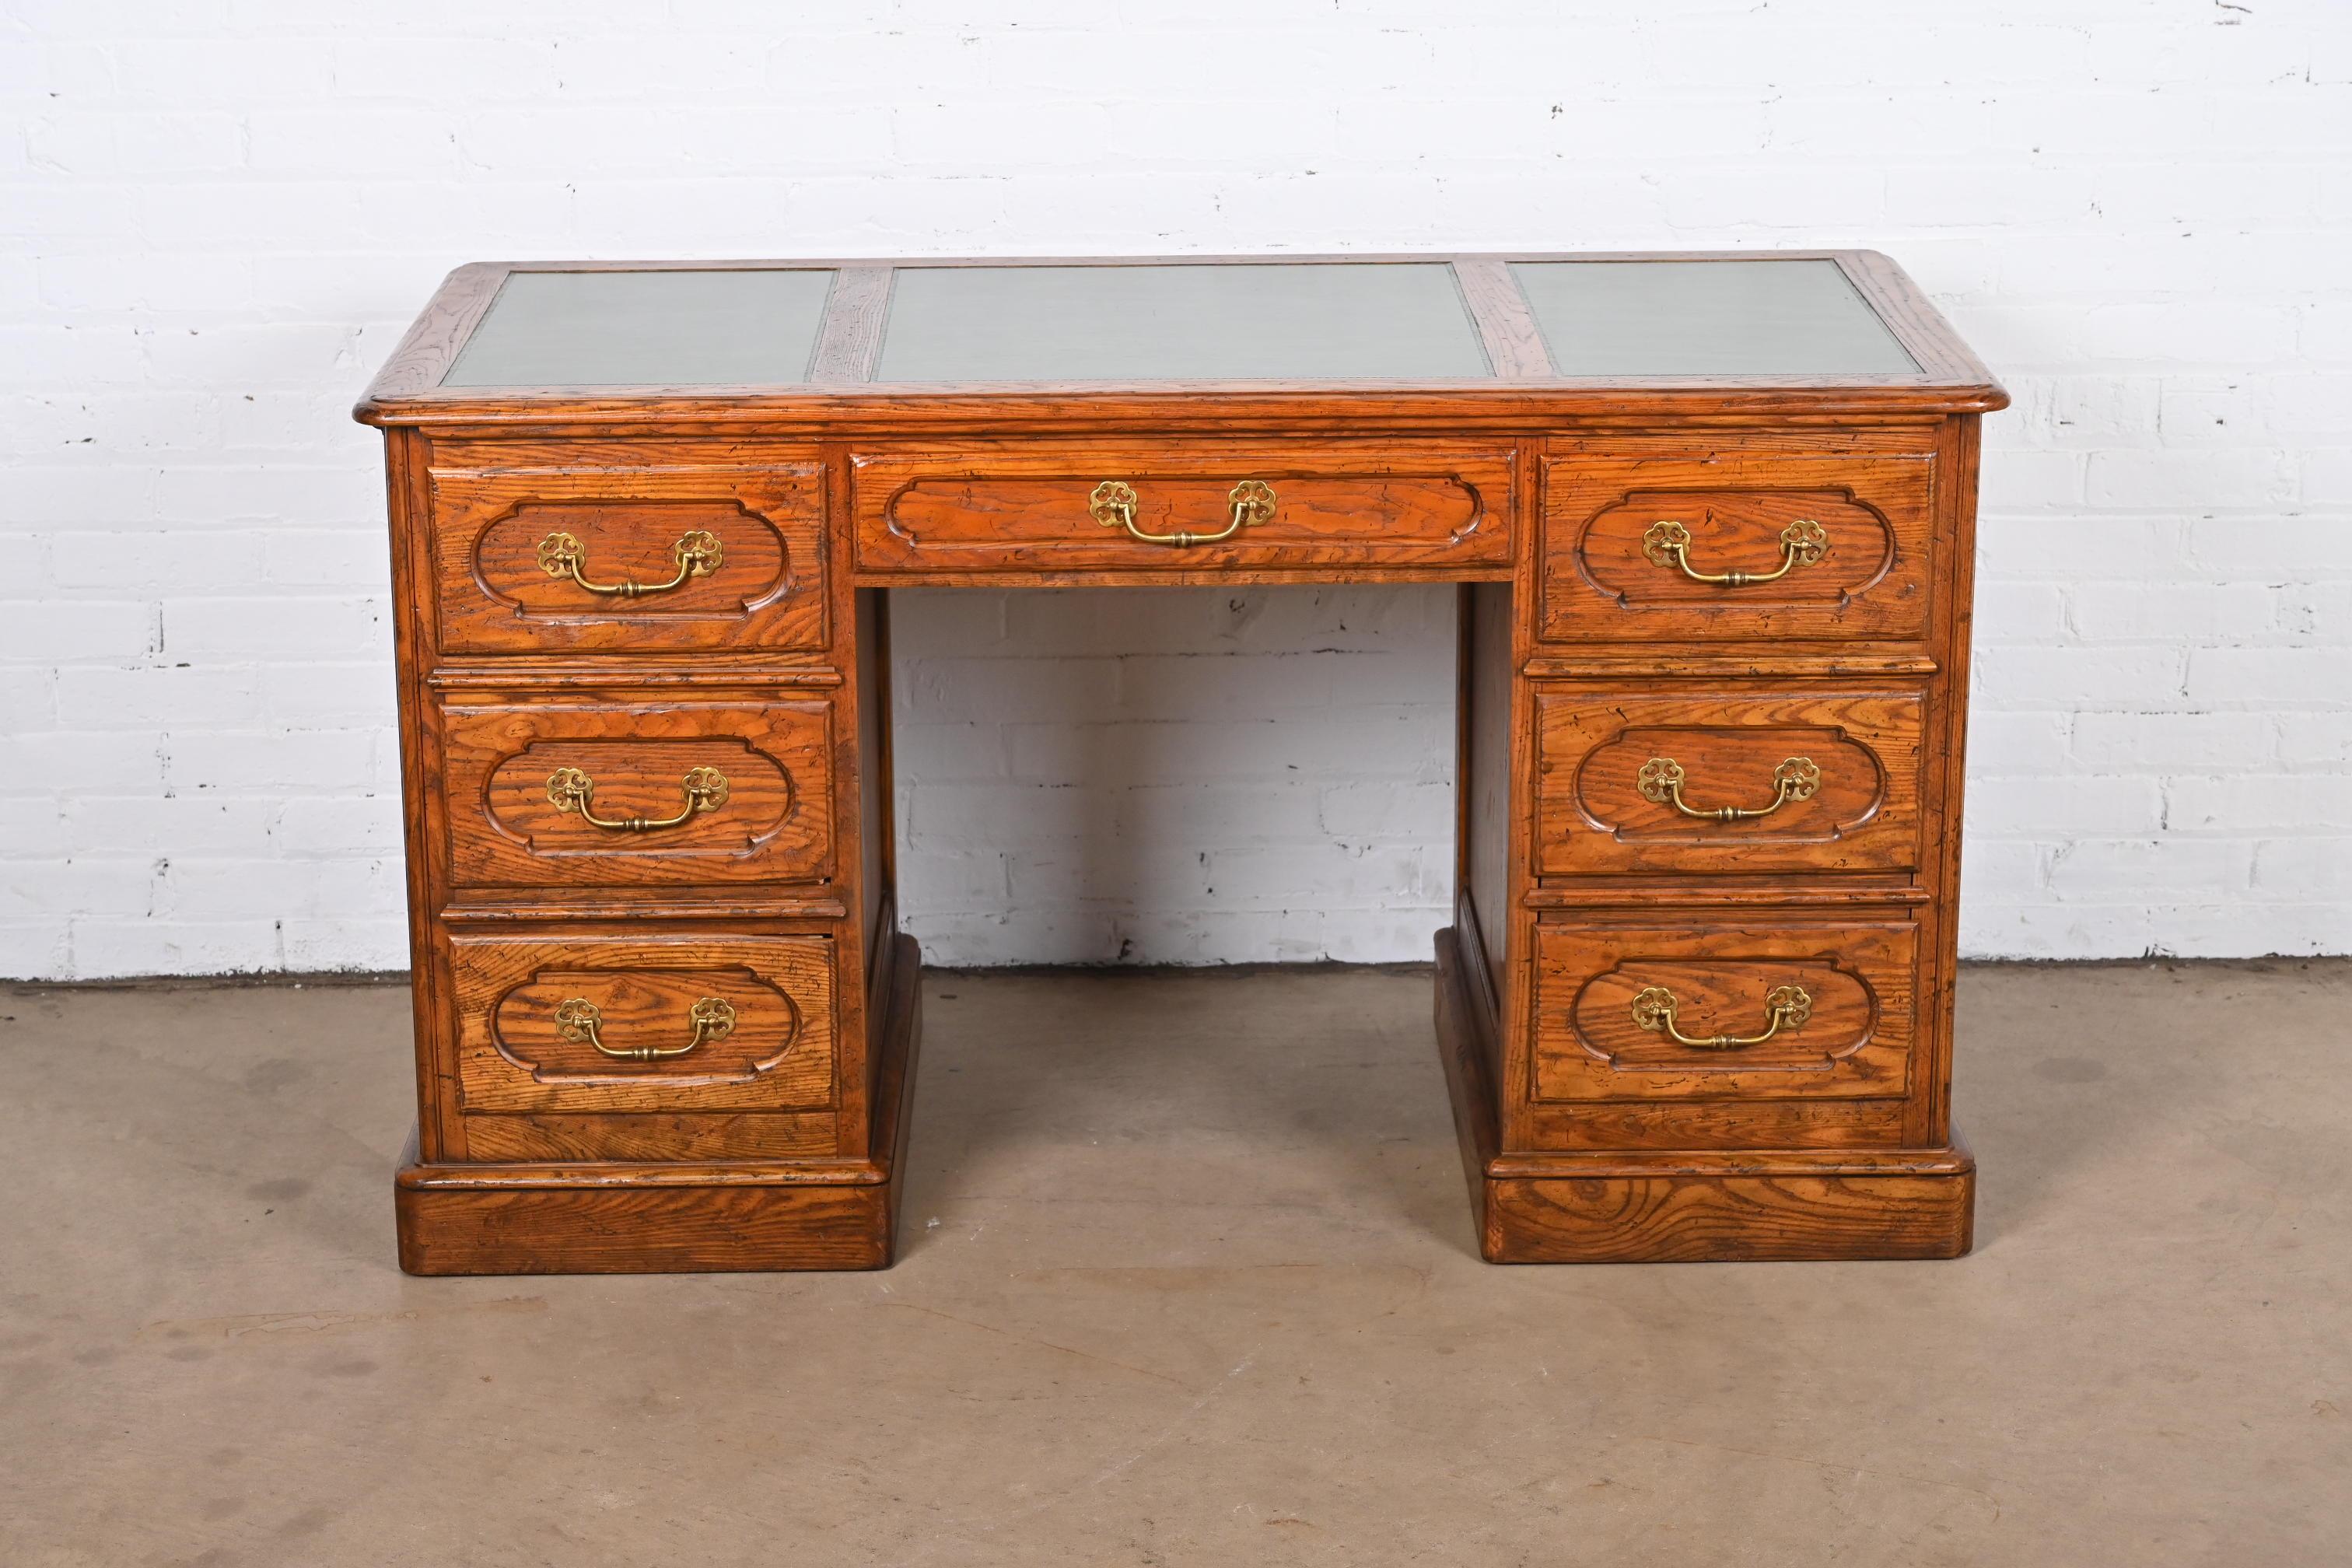 An exceptional French Provincial style desk.

By Baker Furniture, 